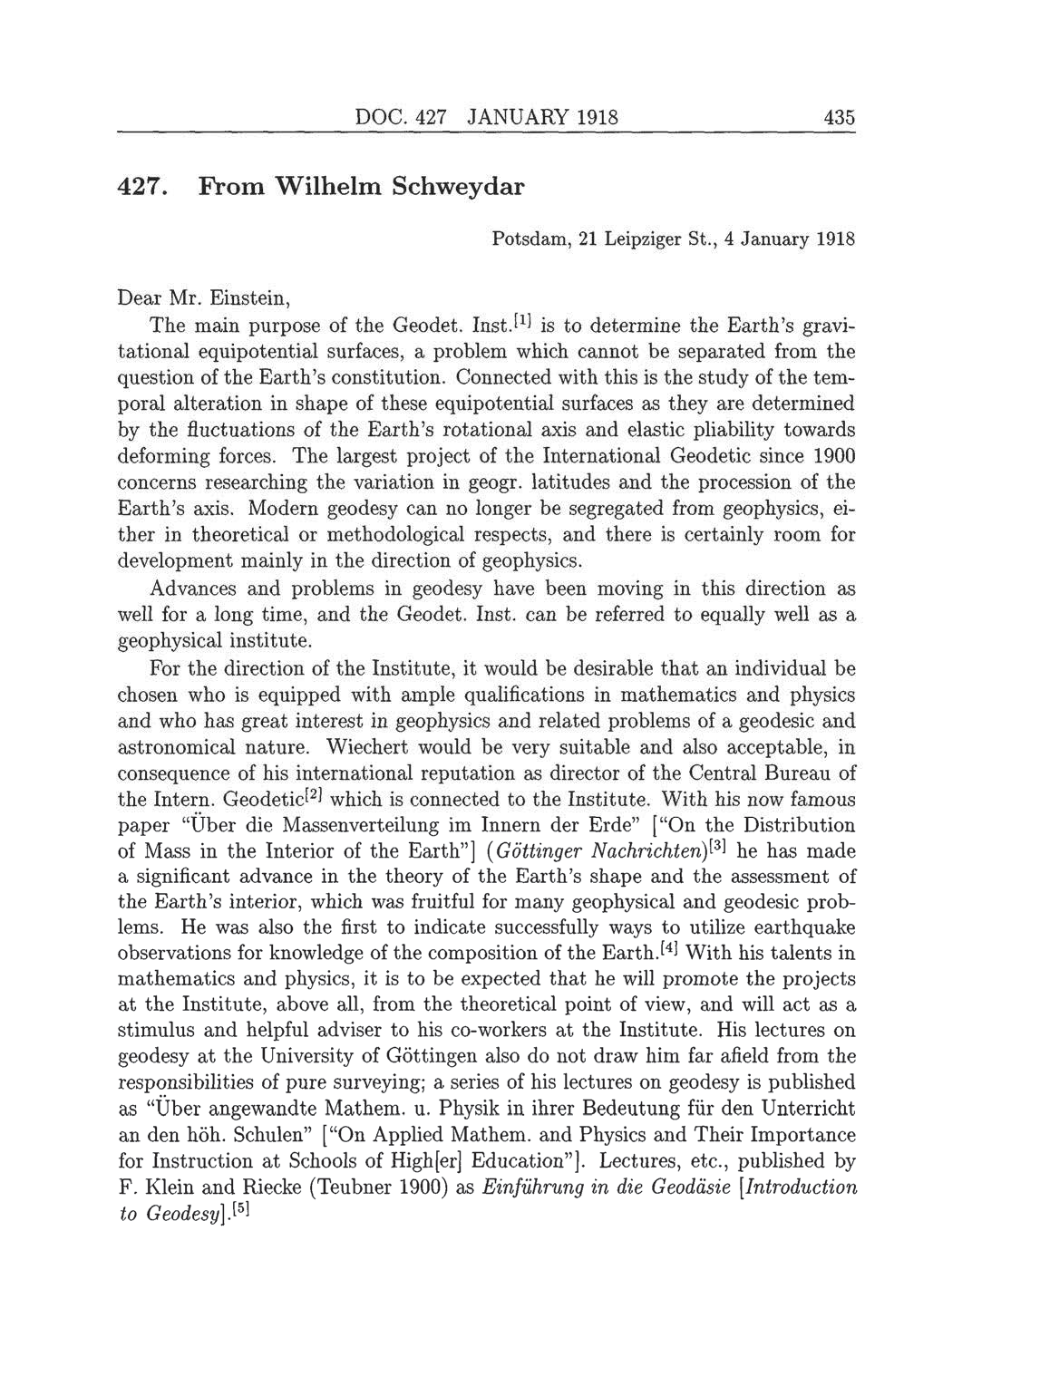 Volume 8: The Berlin Years: Correspondence, 1914-1918 (English translation supplement) page 435